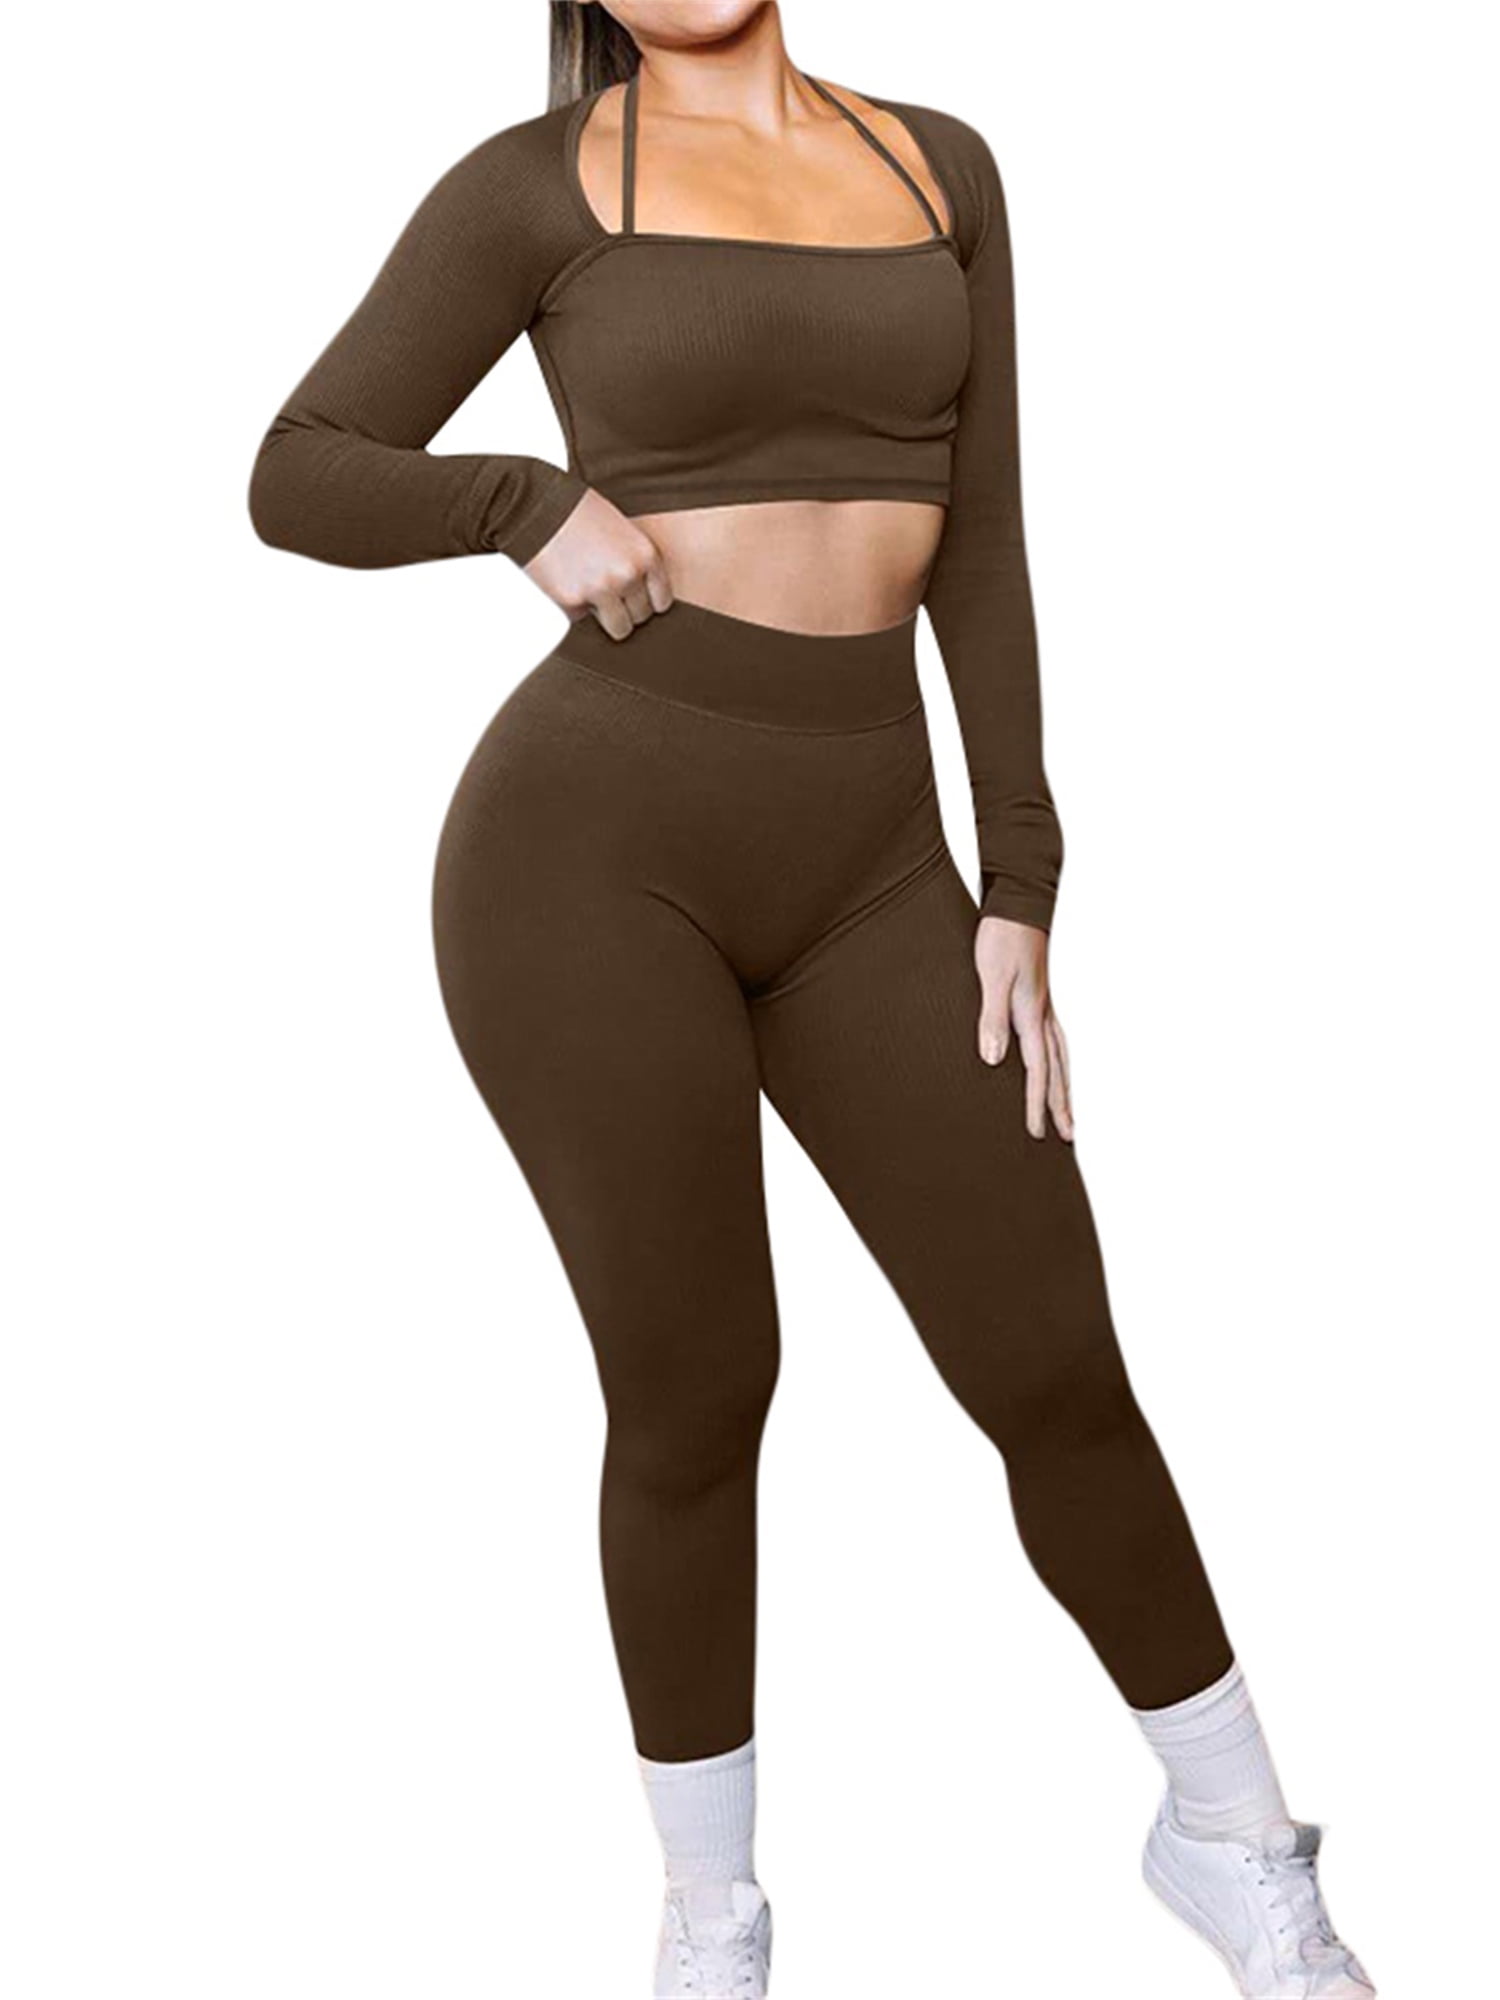  Two Piece Workout Sets for Women - conjunto deportivo para mujer  Long Sleeve Tops Bodycon High Waist Long Pant Leggings 2 Piece Sport  Outfits Yoga Gym Clothes Active Tracksuits Sets Khaki